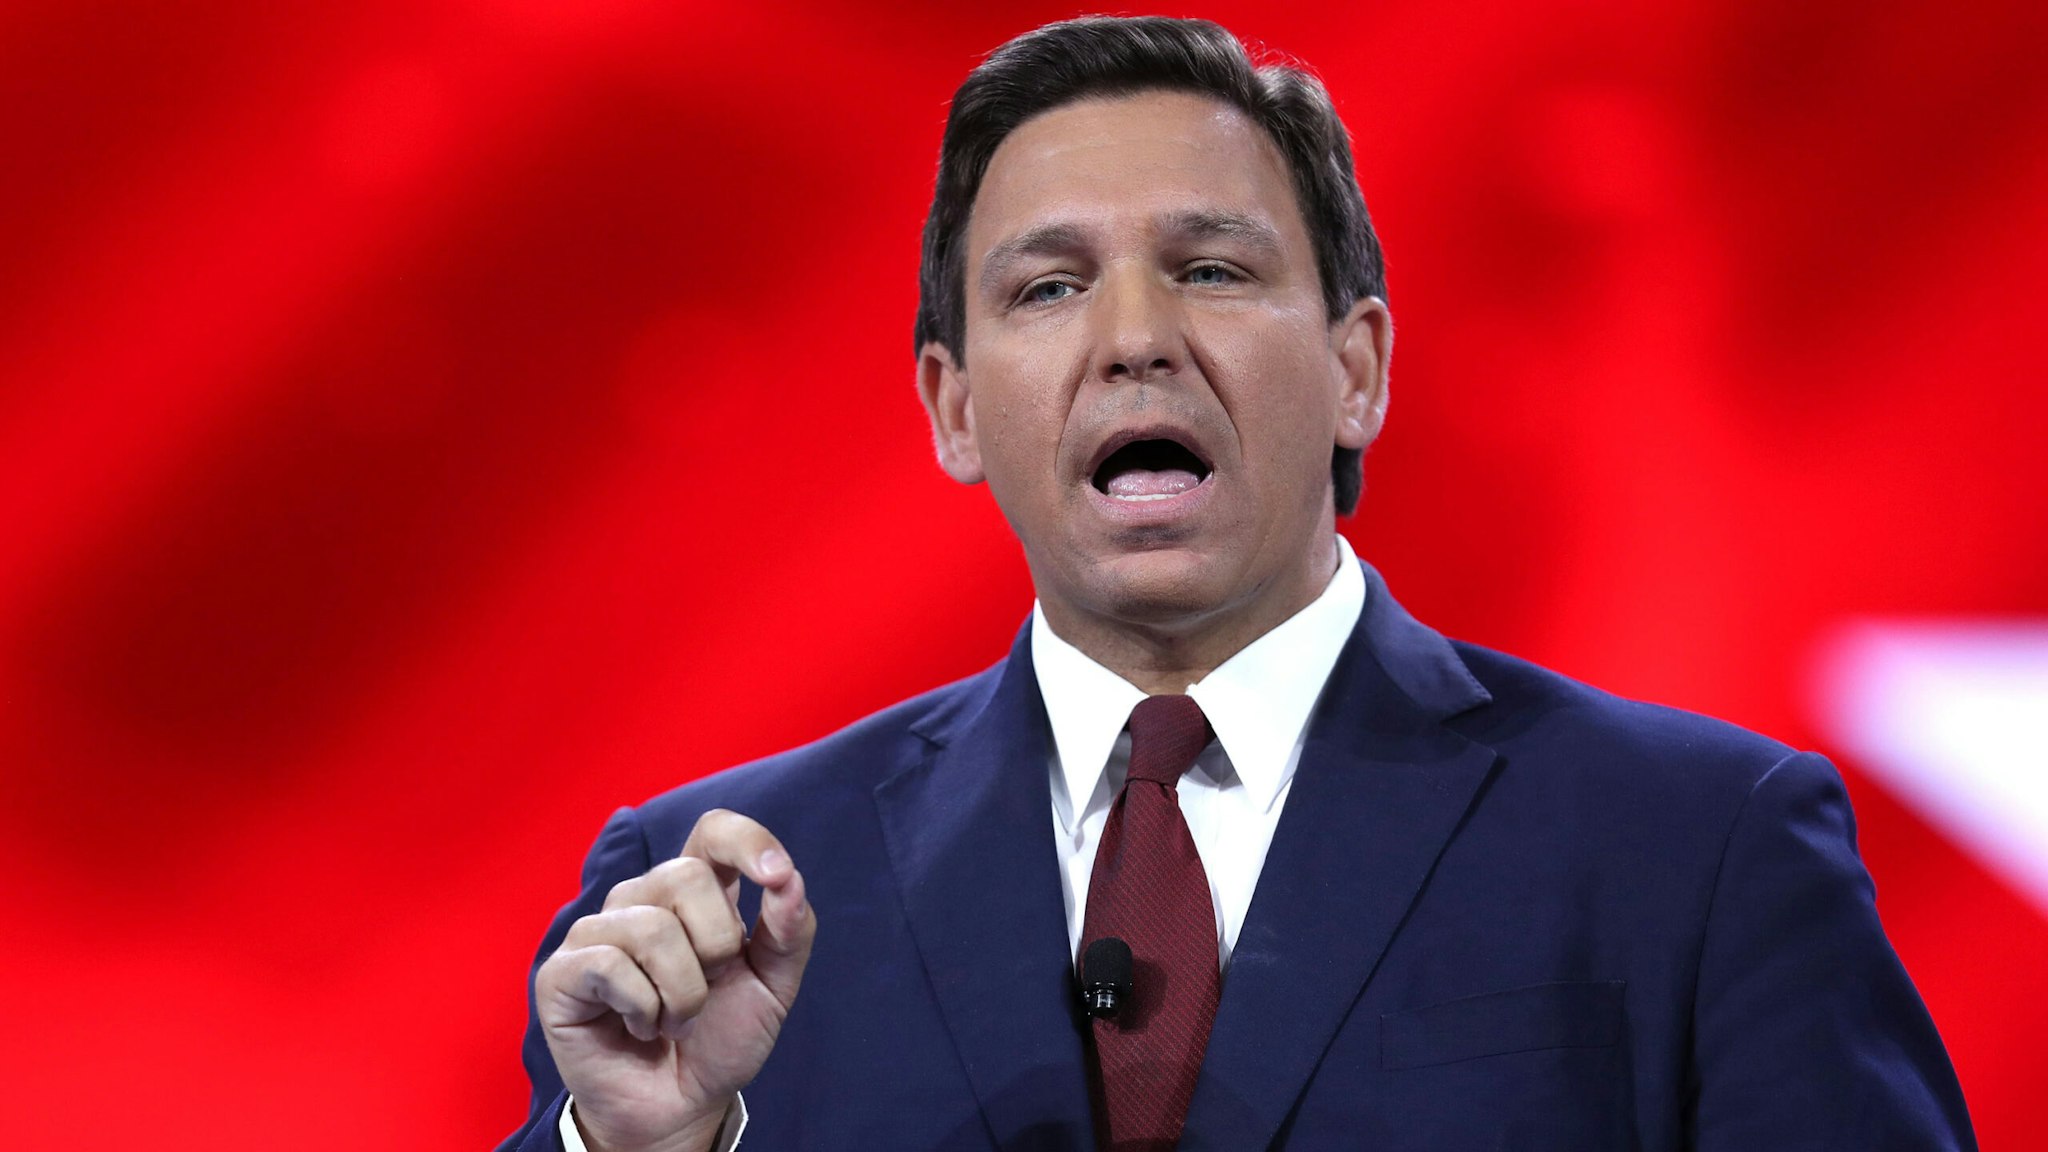 ORLANDO, FLORIDA - FEBRUARY 26: Florida Gov. Ron DeSantis speaks at the opening of the Conservative Political Action Conference at the Hyatt Regency on February 26, 2021 in Orlando, Florida. Begun in 1974, CPAC brings together conservative organizations, activists and world leaders to discuss issues important to them.